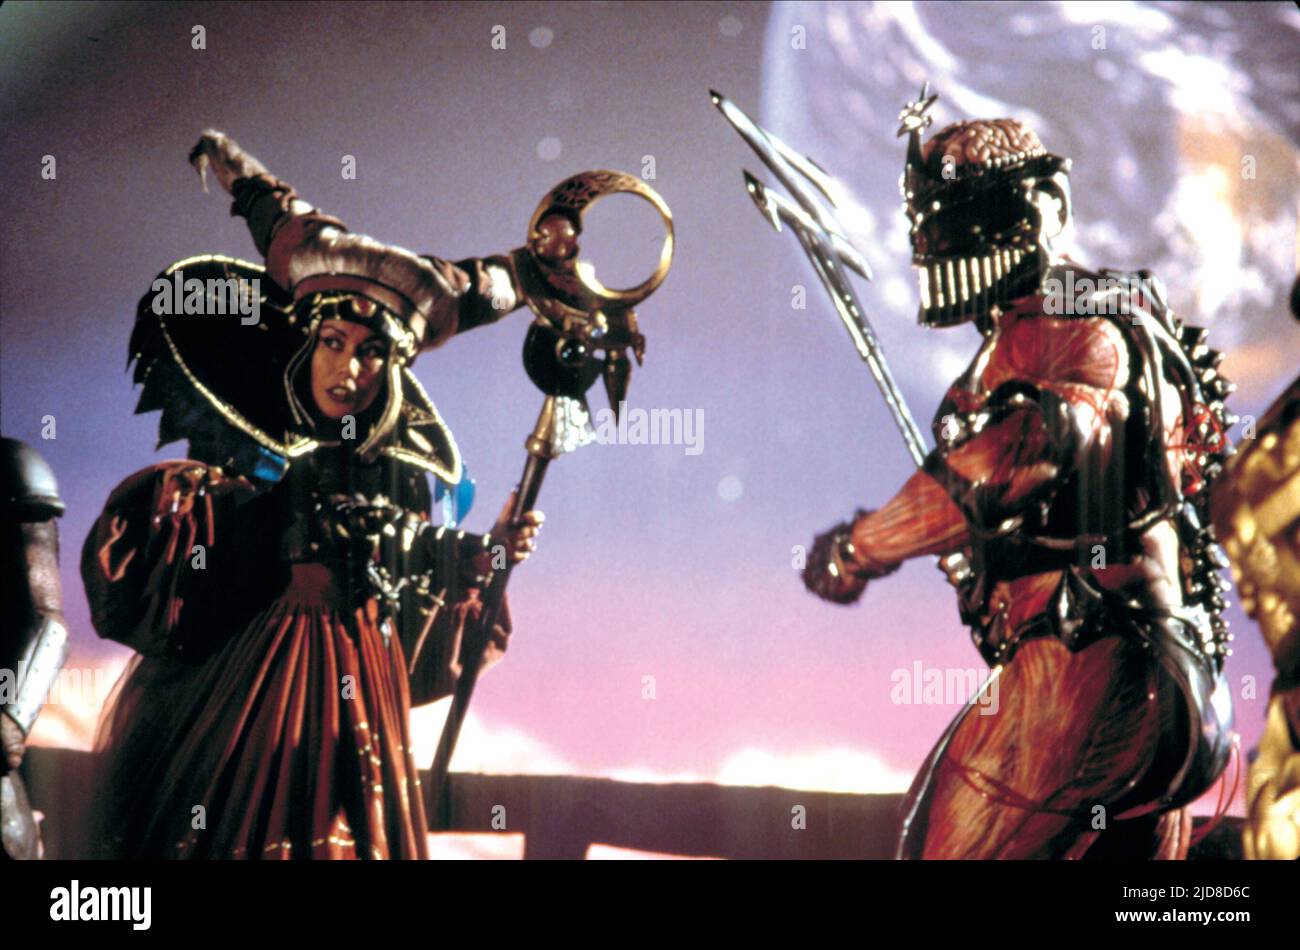 CORTEZ,GINTHER, Mighty Morphin Power Rangers: IL FILM, 1995 Foto Stock